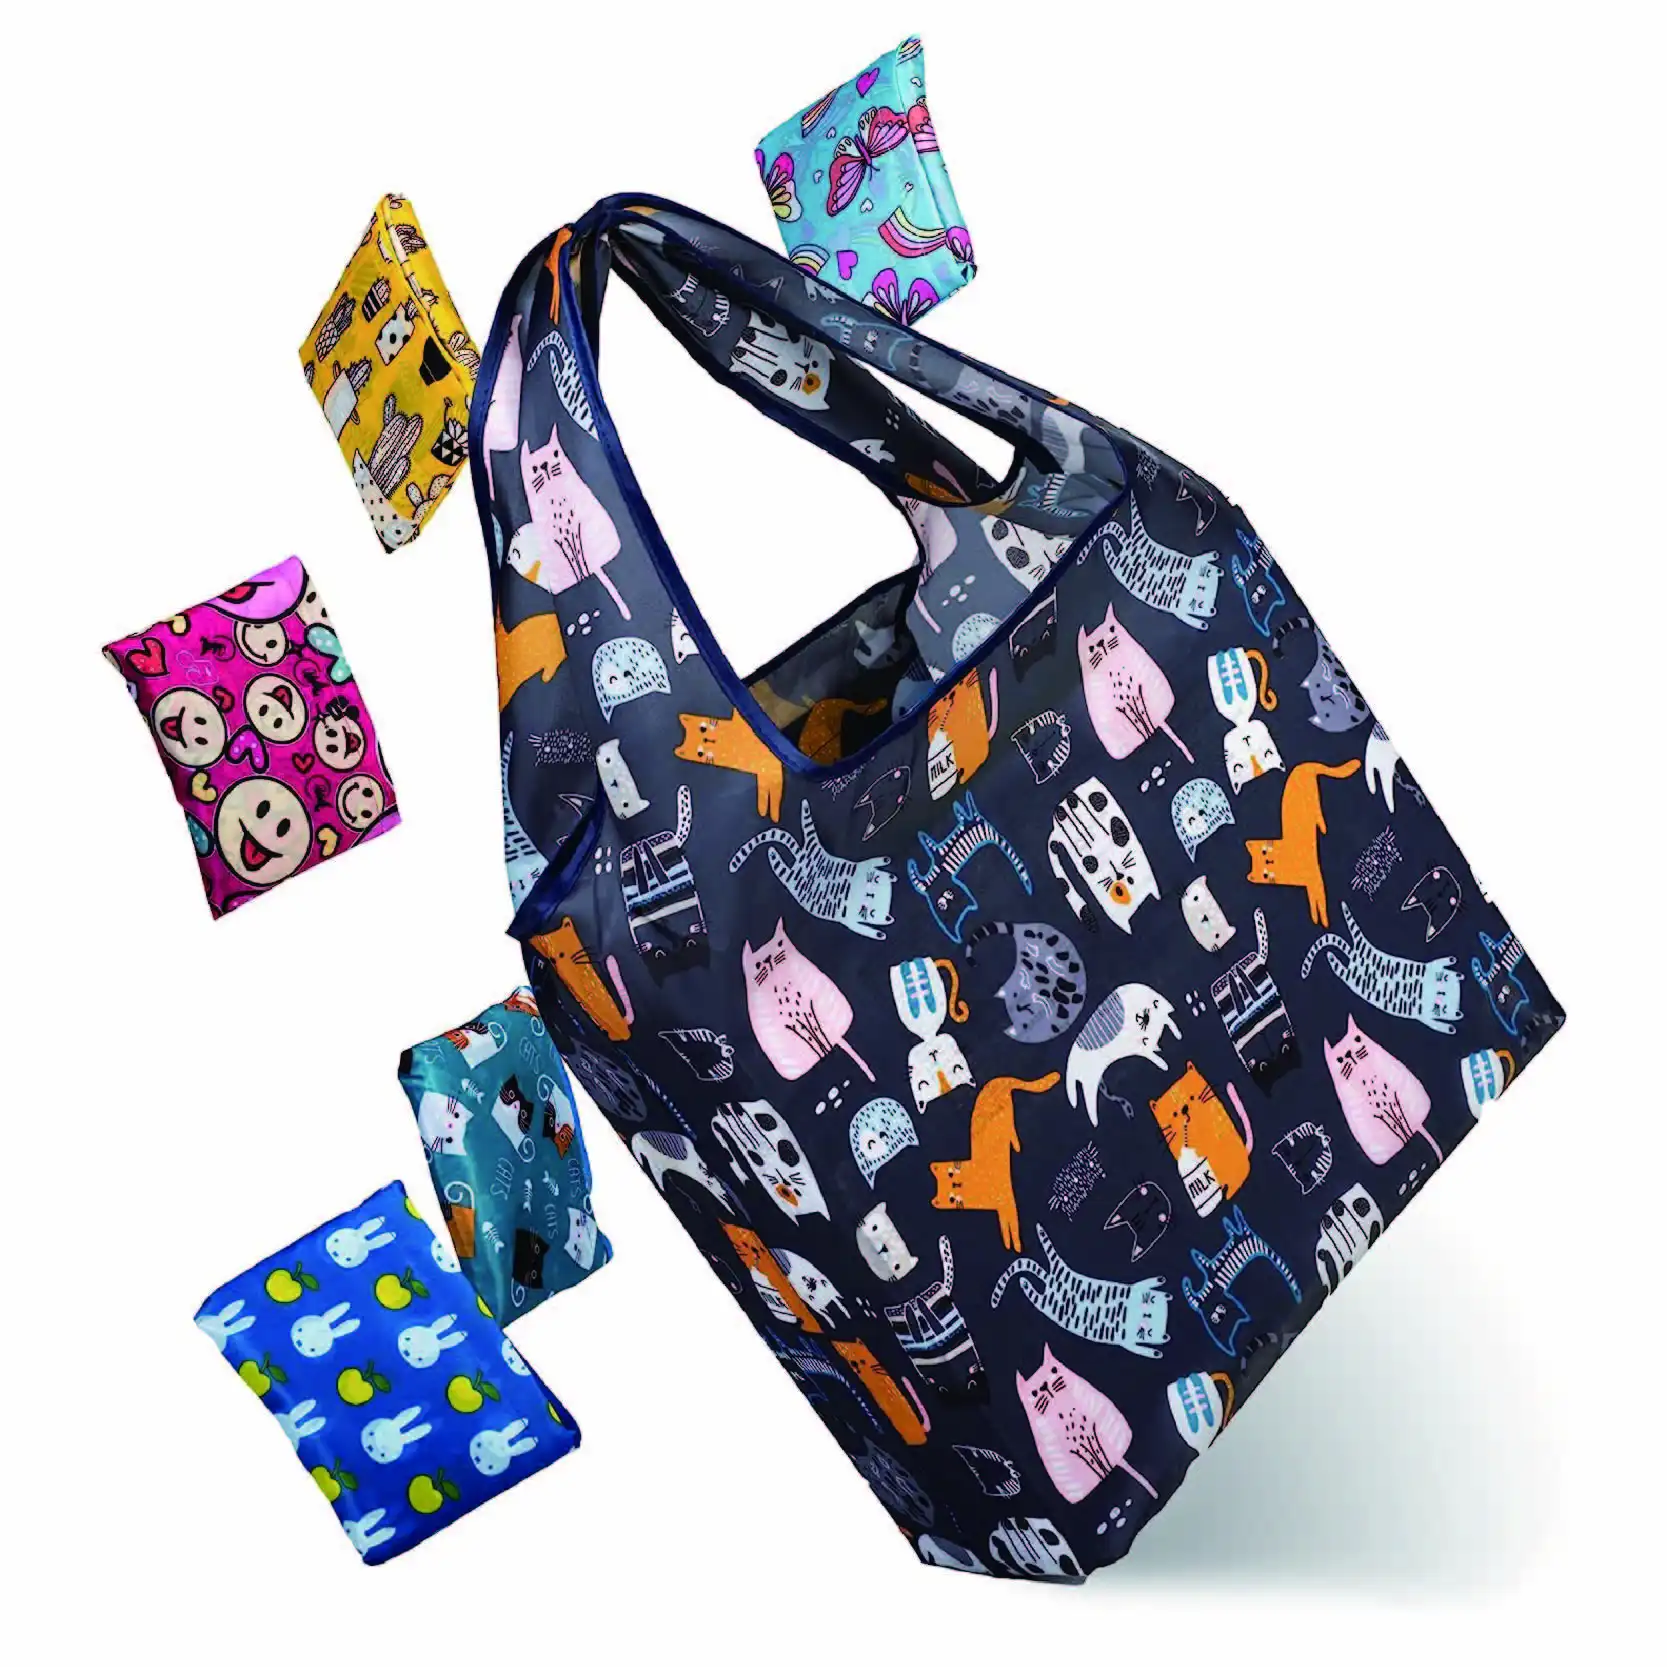 New arrival latest design vegetable and fruit reusable shopping bag foldable polyester tote bags